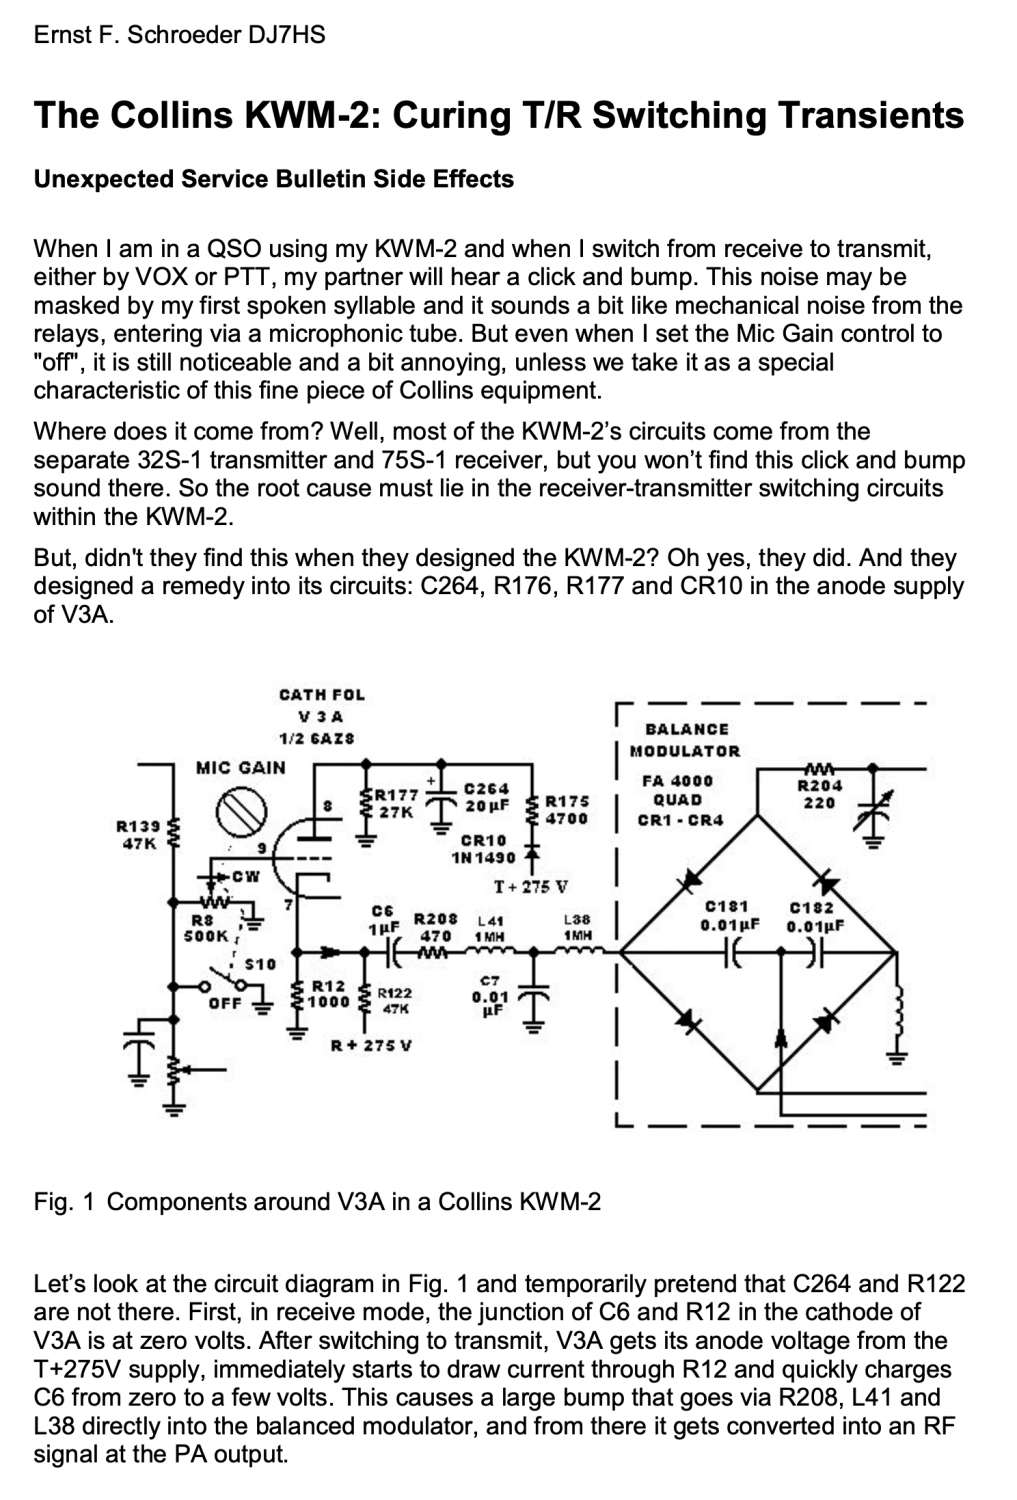 Collins KWM-2 Transceiver - Curing TR Switching Transients (DJ7HS)